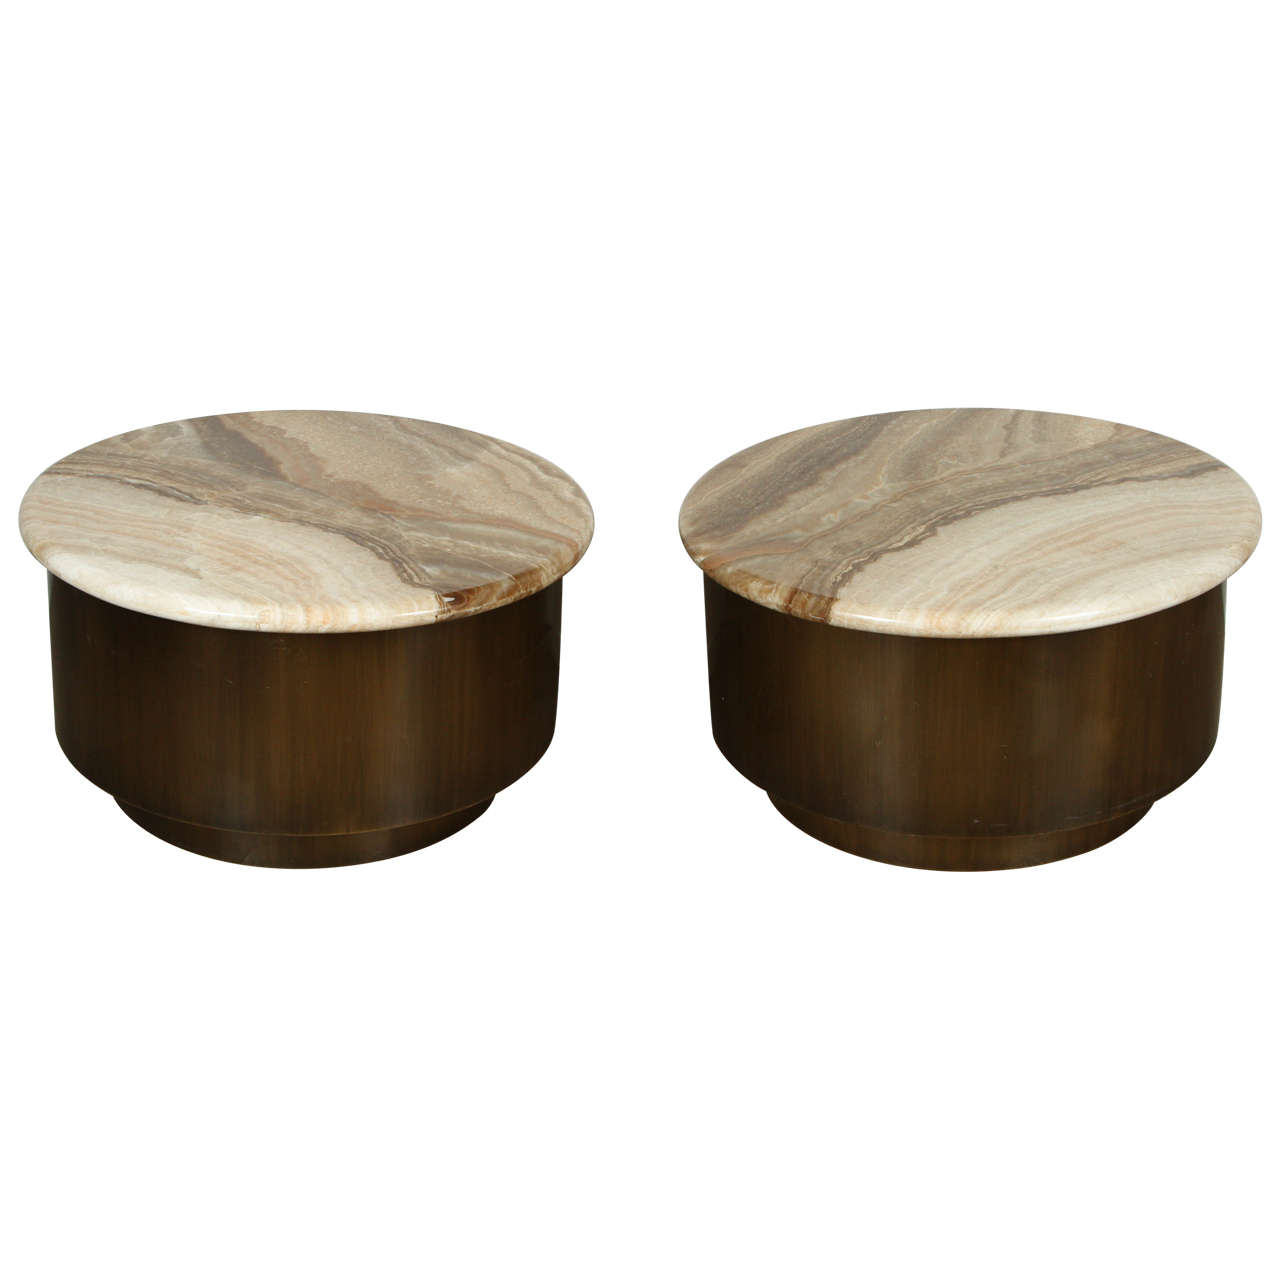 Spectacular Pair of Onyx and Bronze End Tables by Steve Chase